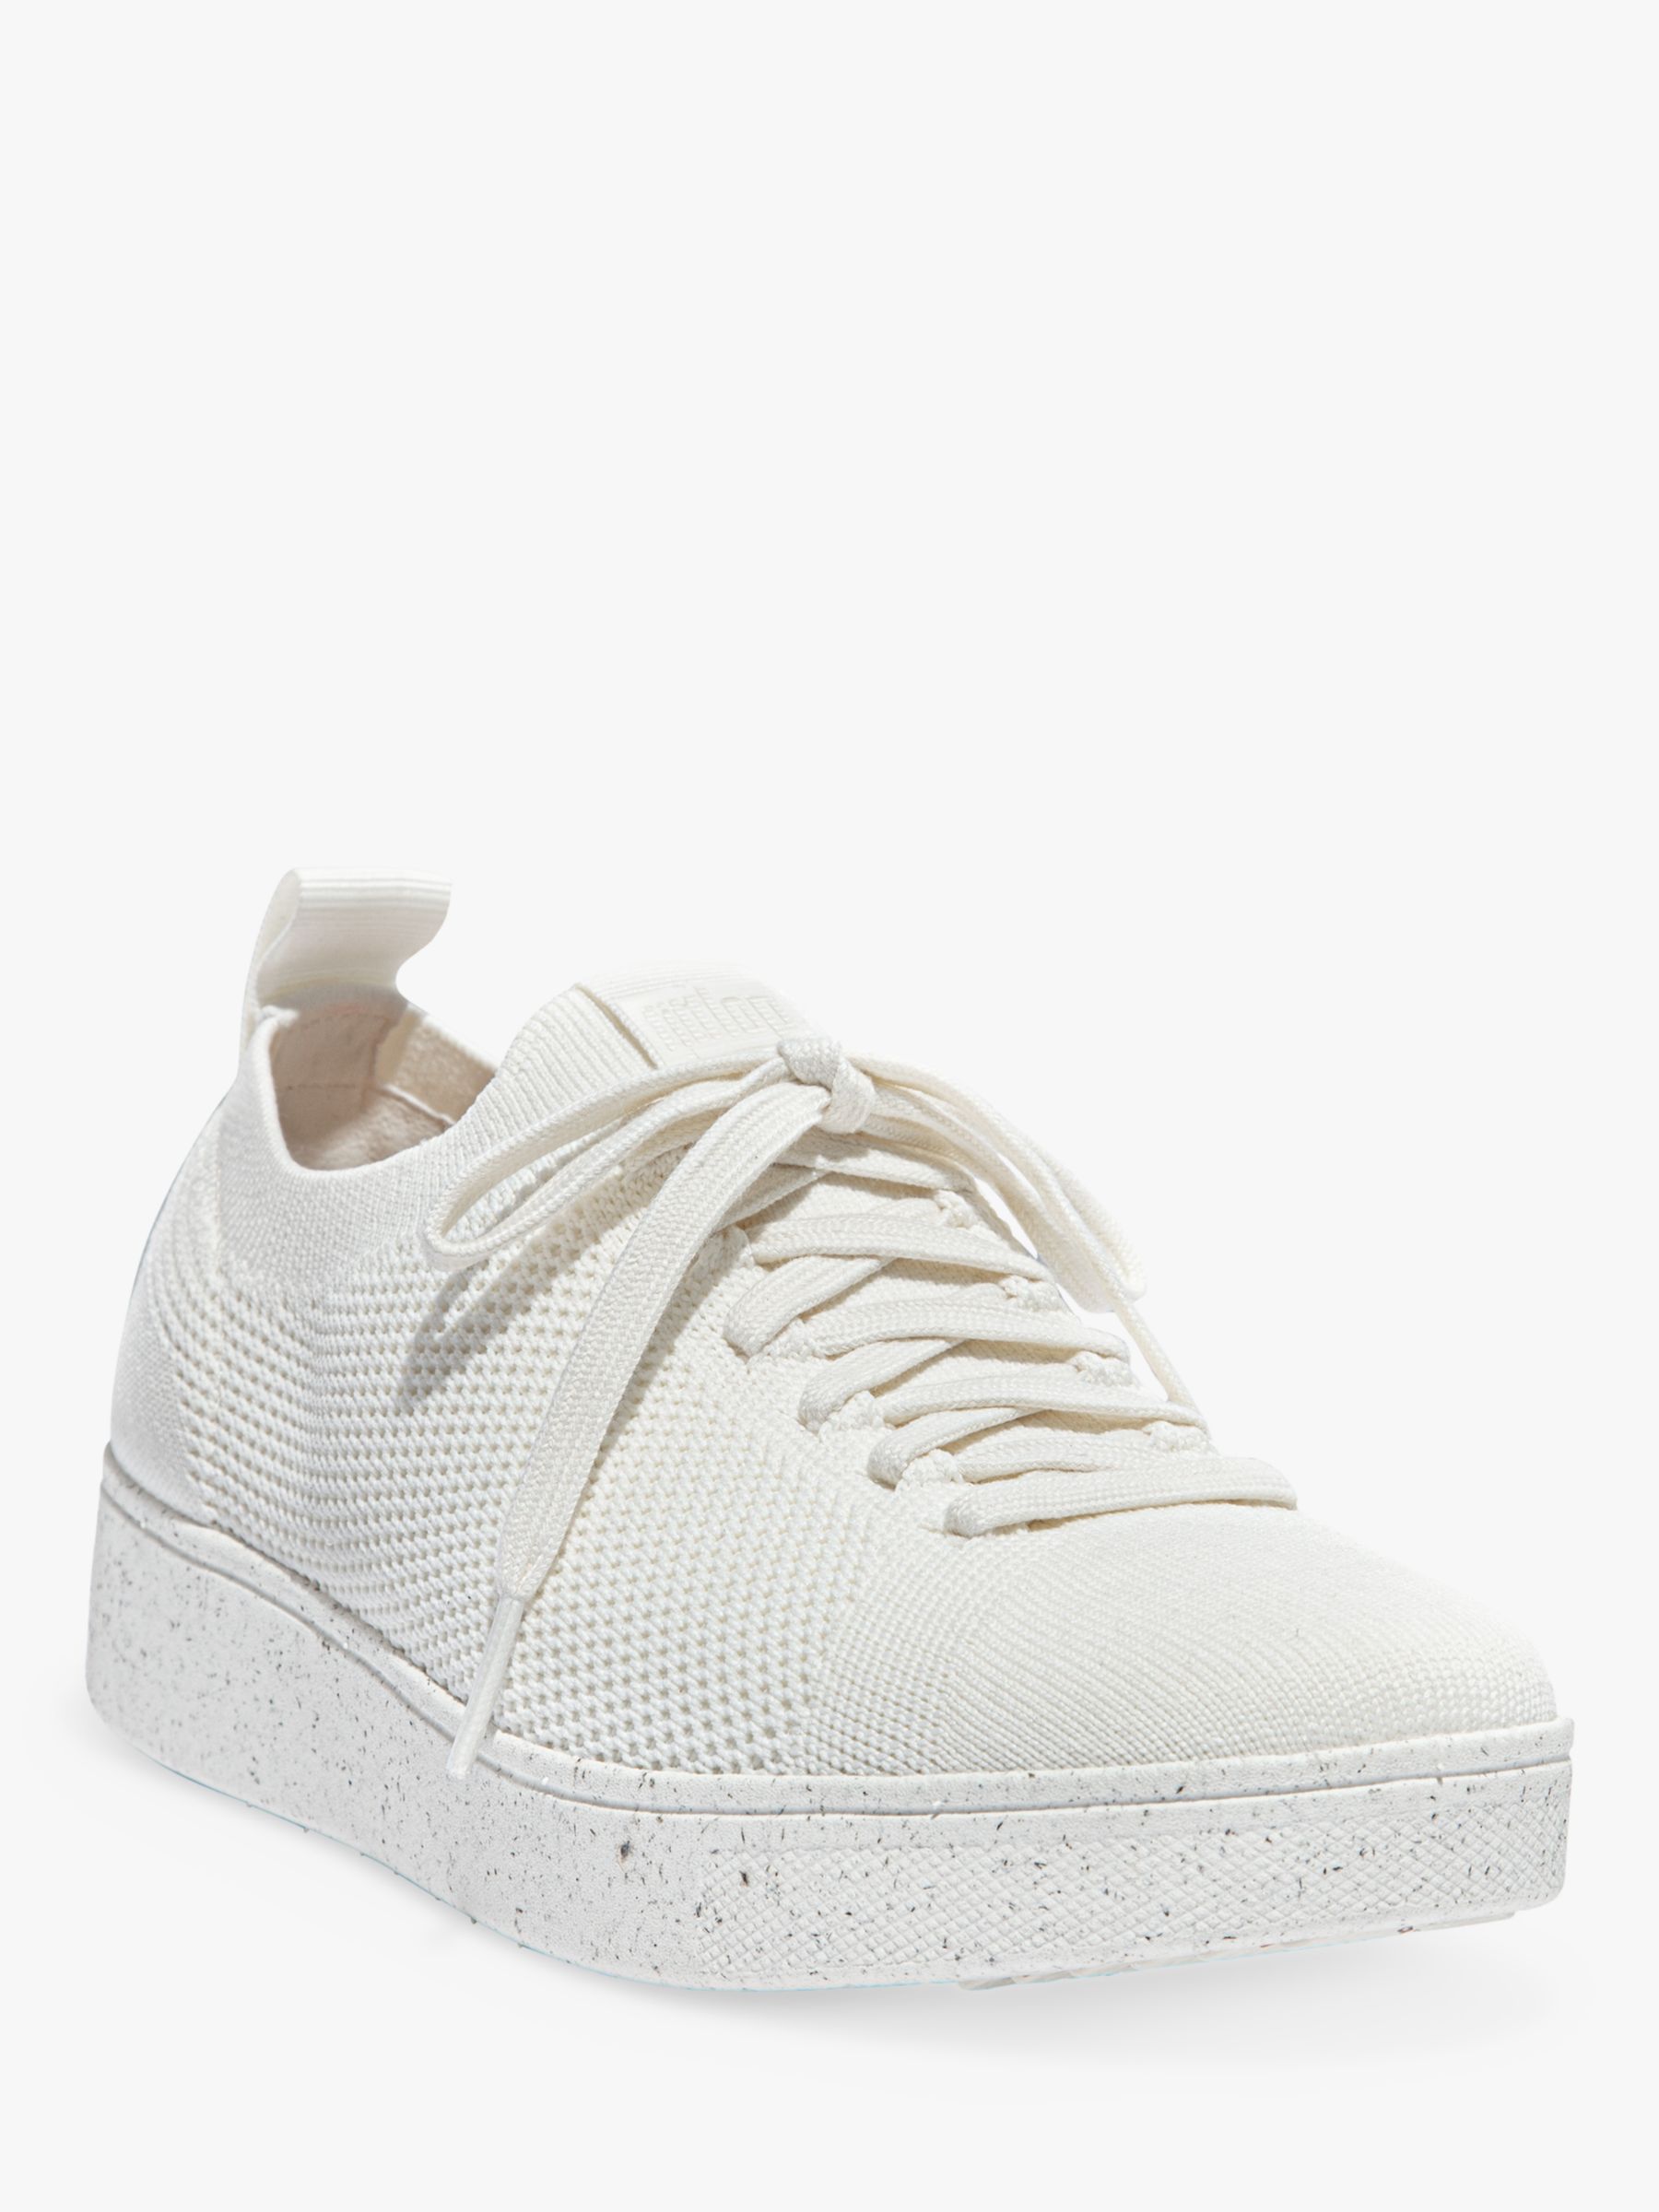 Buy FitFlop Rally Lace Up Trainers, Cream Online at johnlewis.com